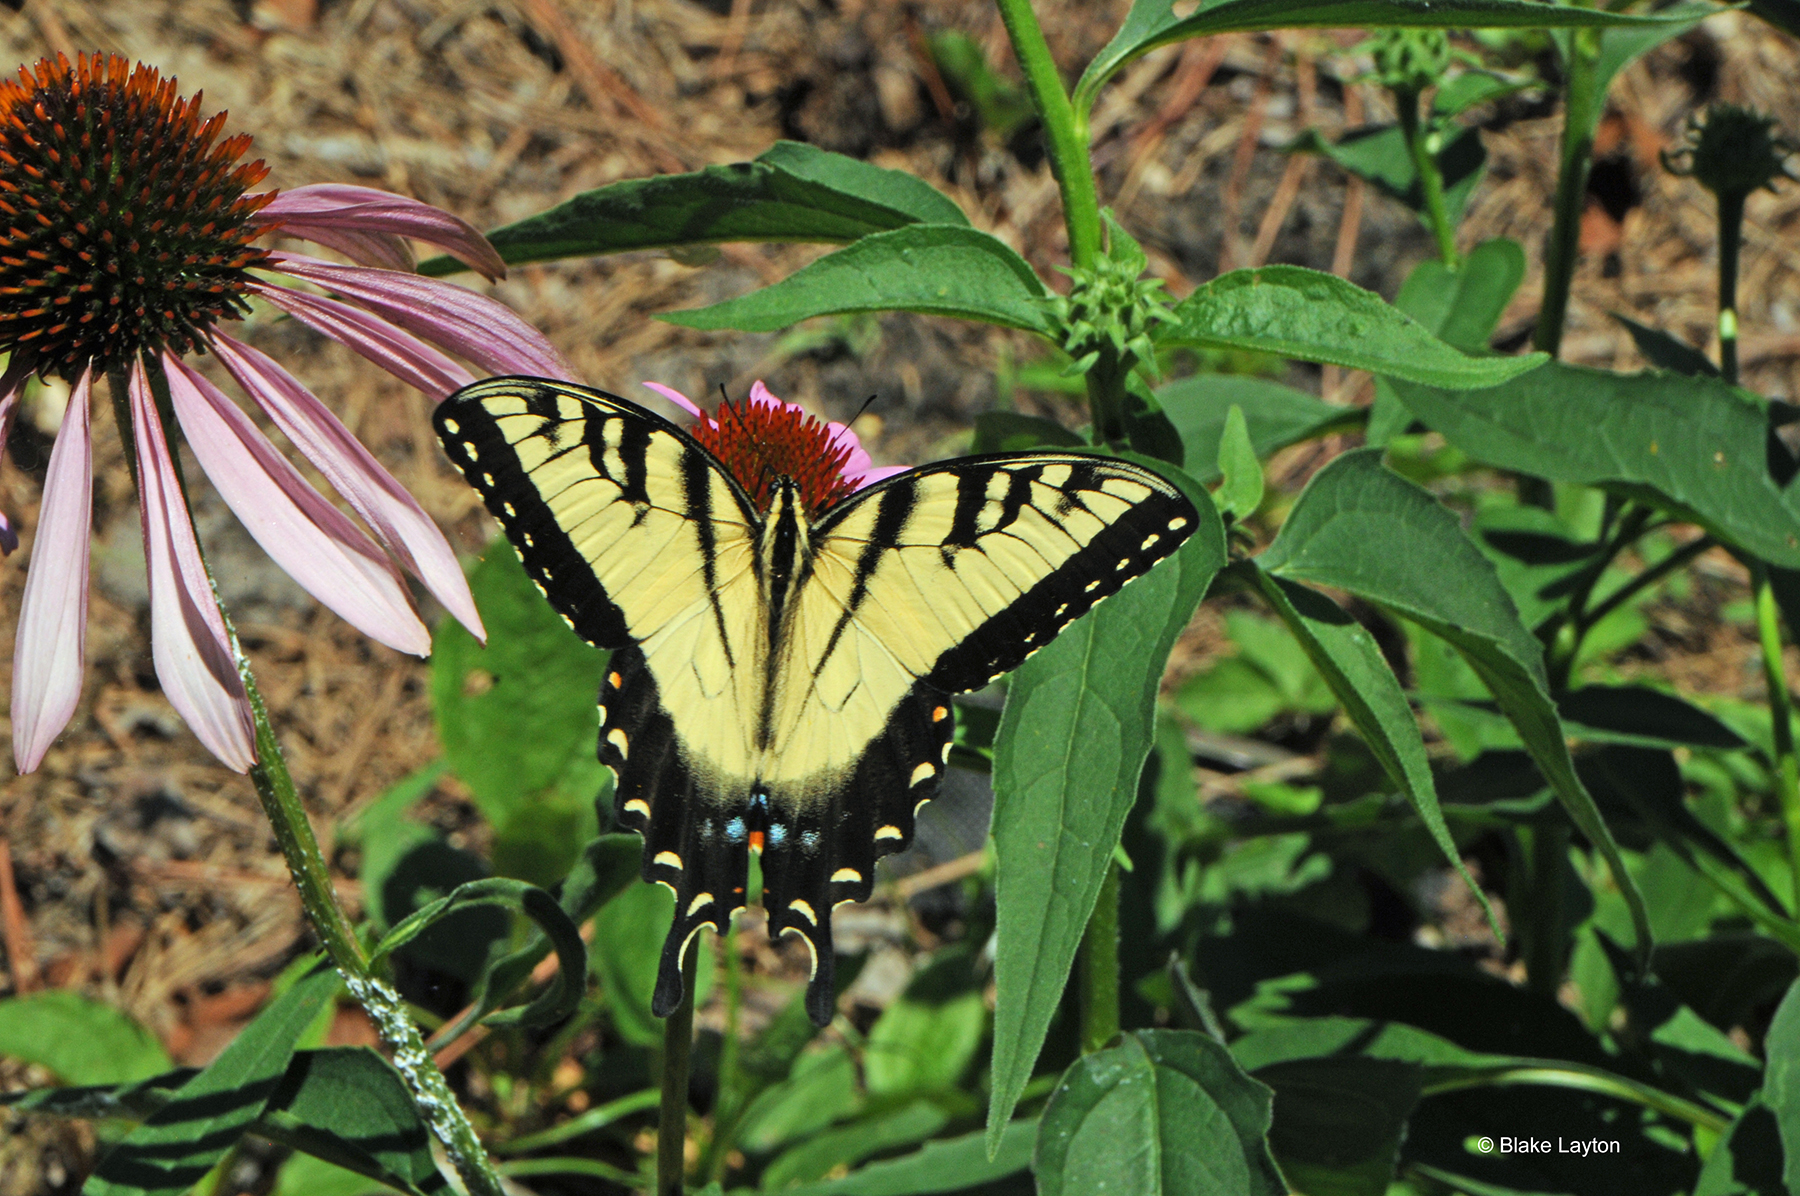 A yellow and black butterfly rests on purple flowers.